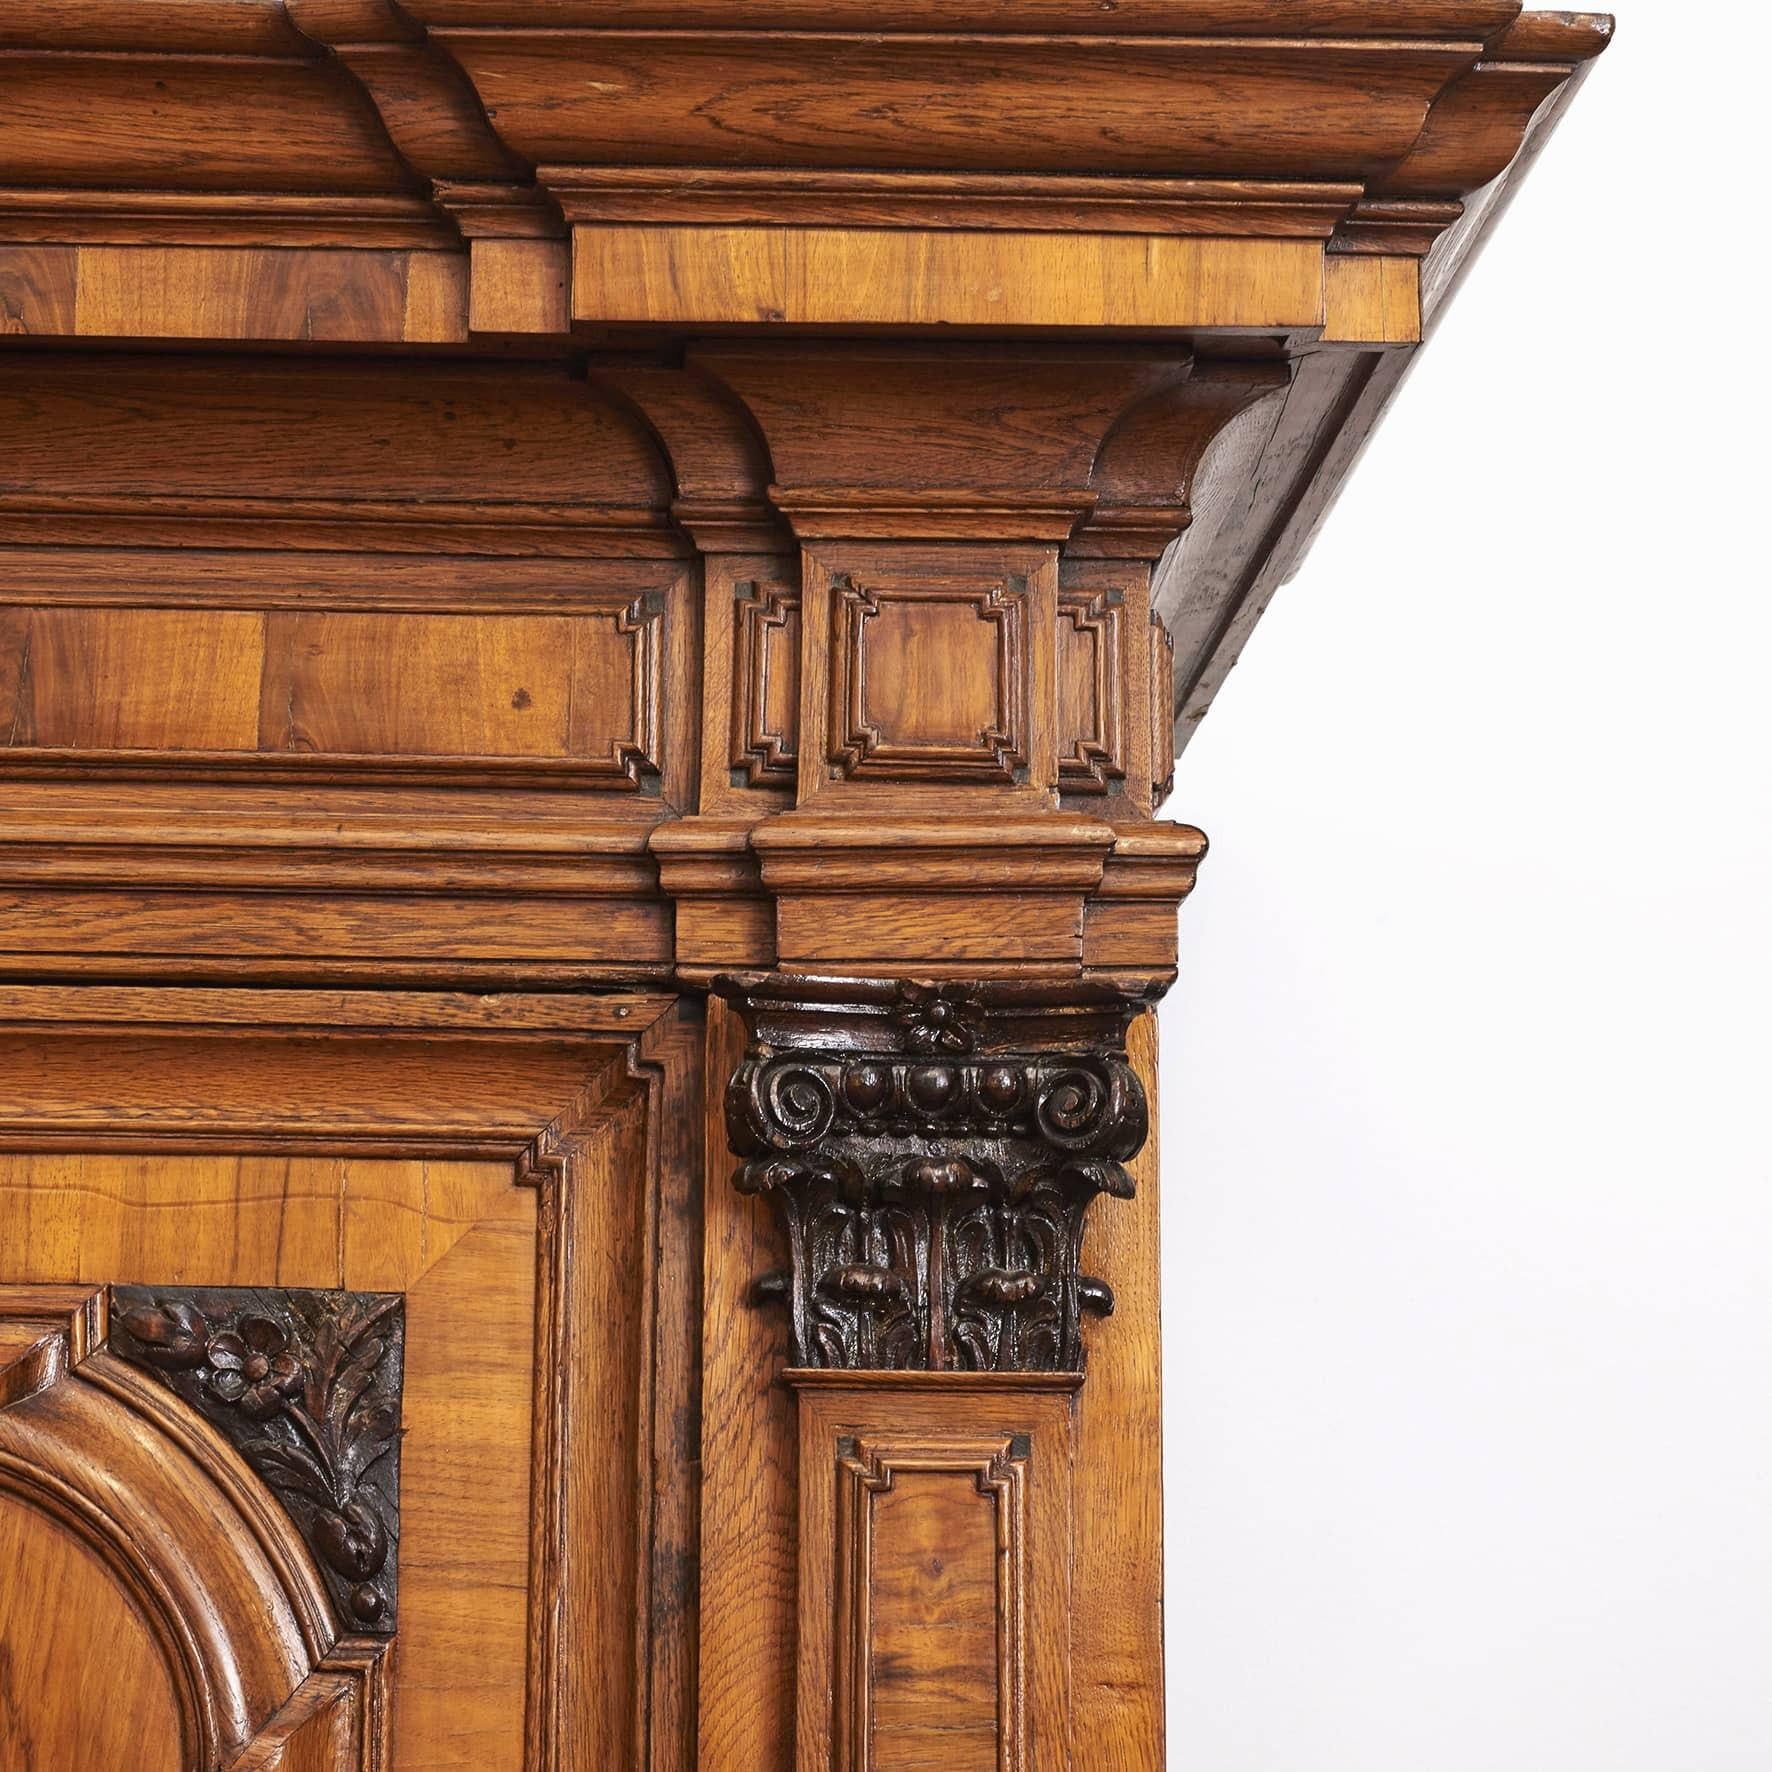 Antique Danish 18th Century Baroque Manor House Kast or Armoire In Good Condition For Sale In Kastrup, DK